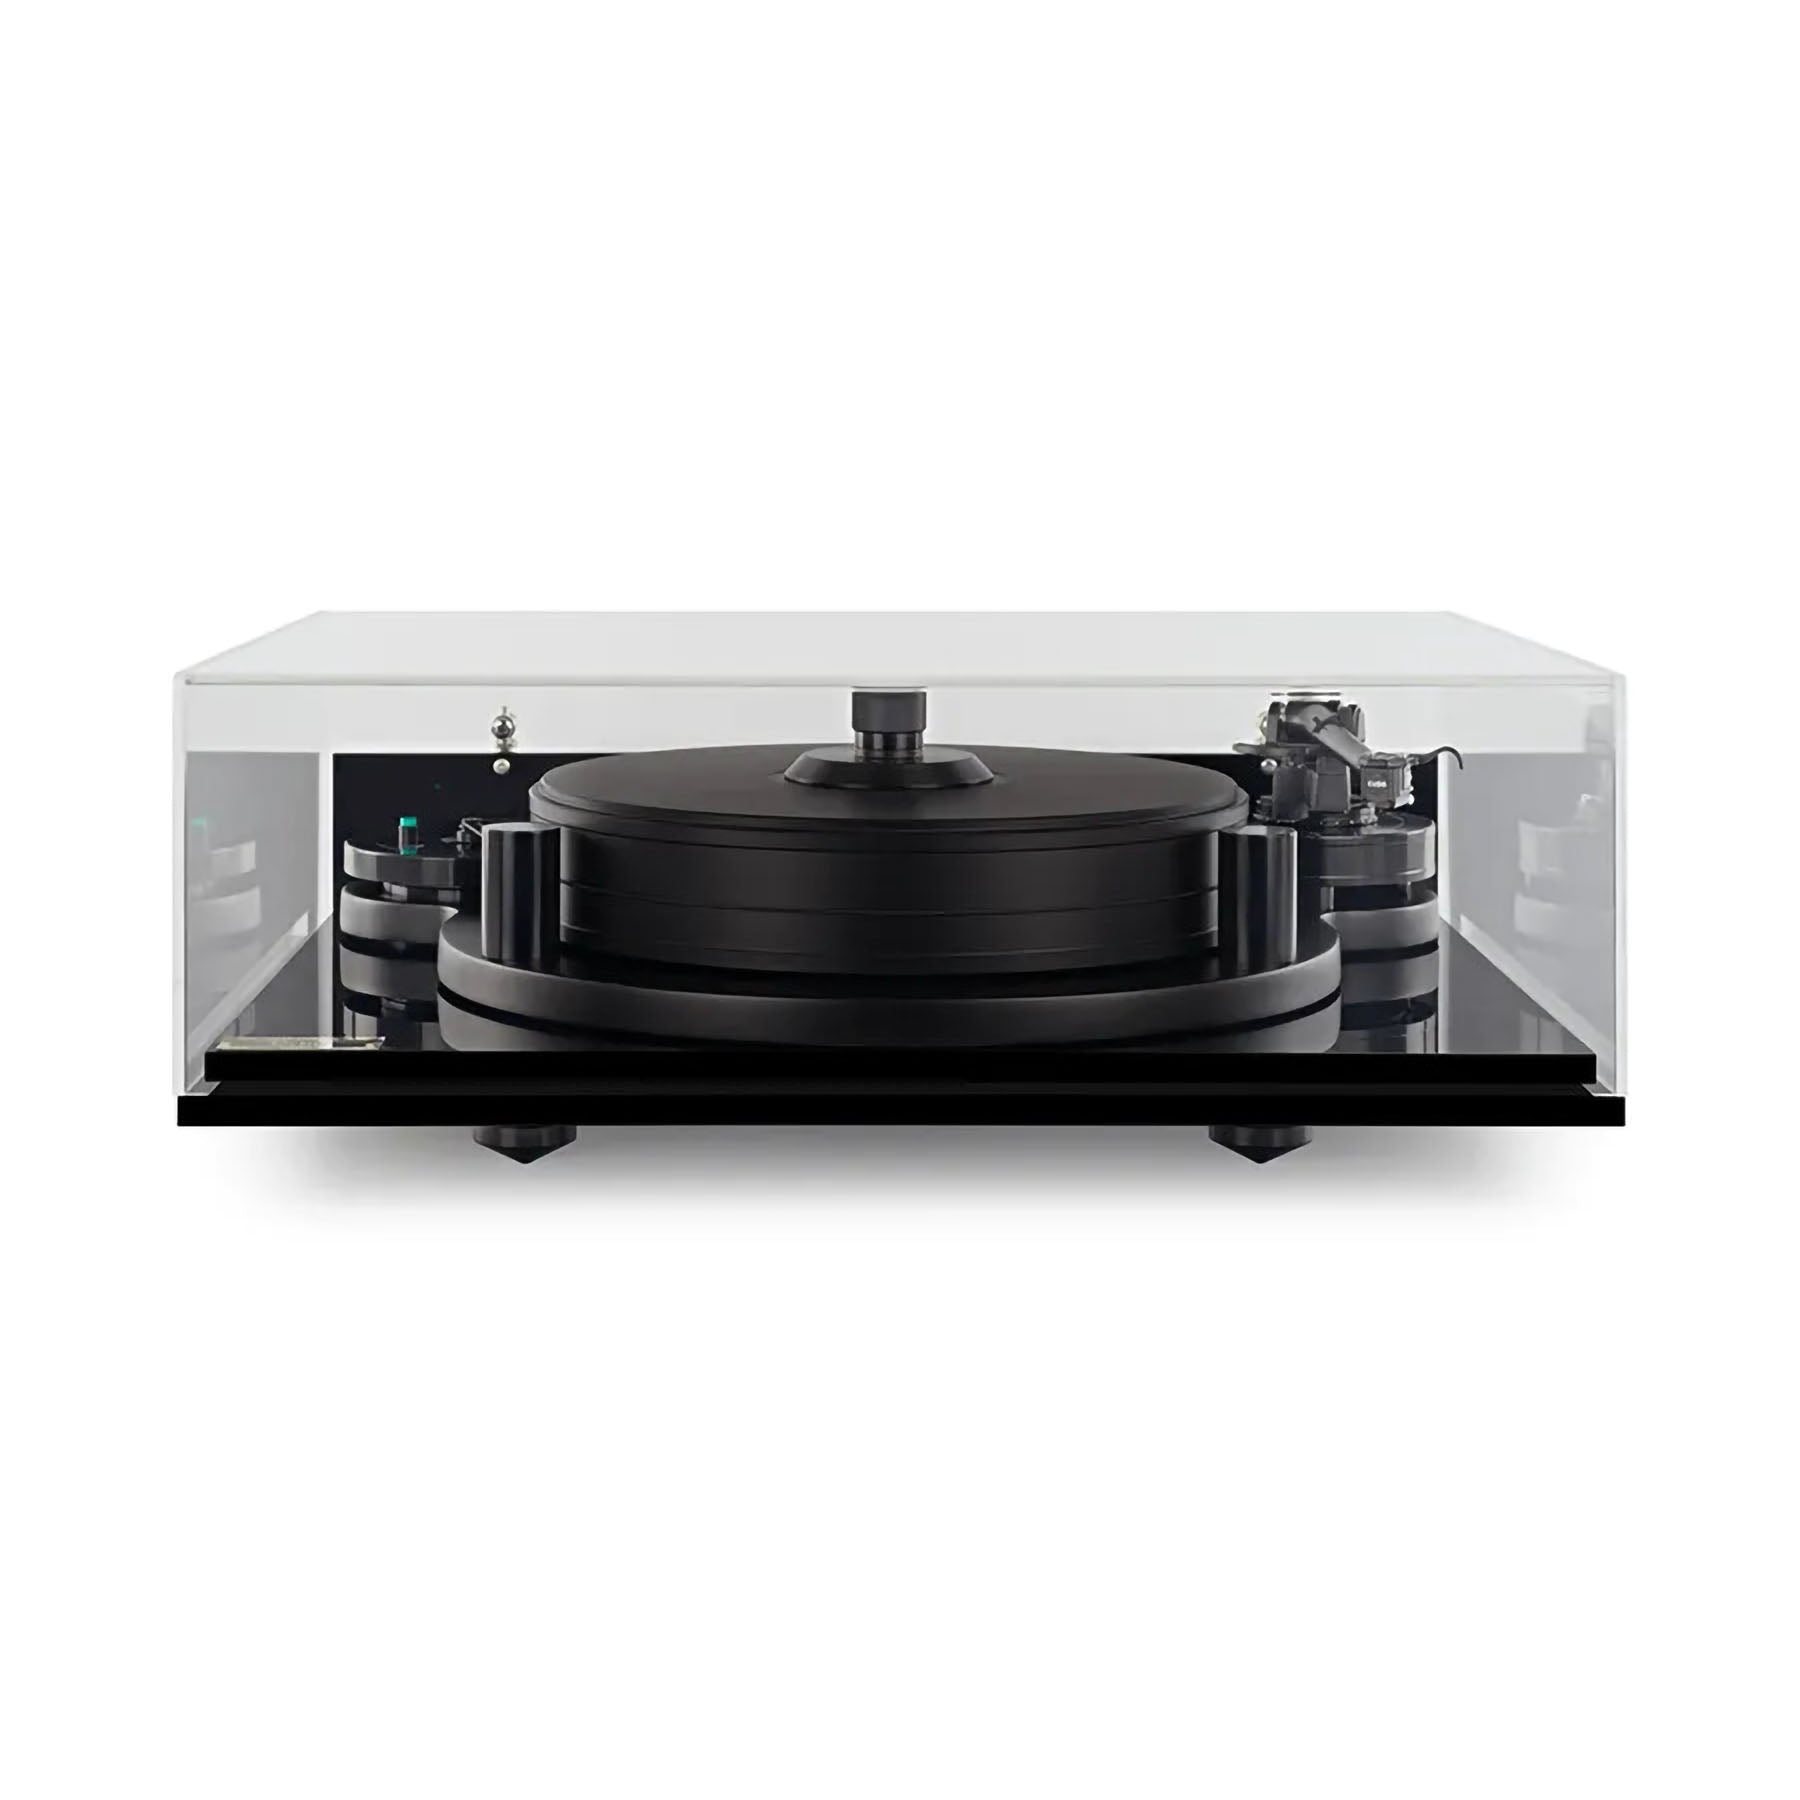 Michell Orbe Flagship Turntable